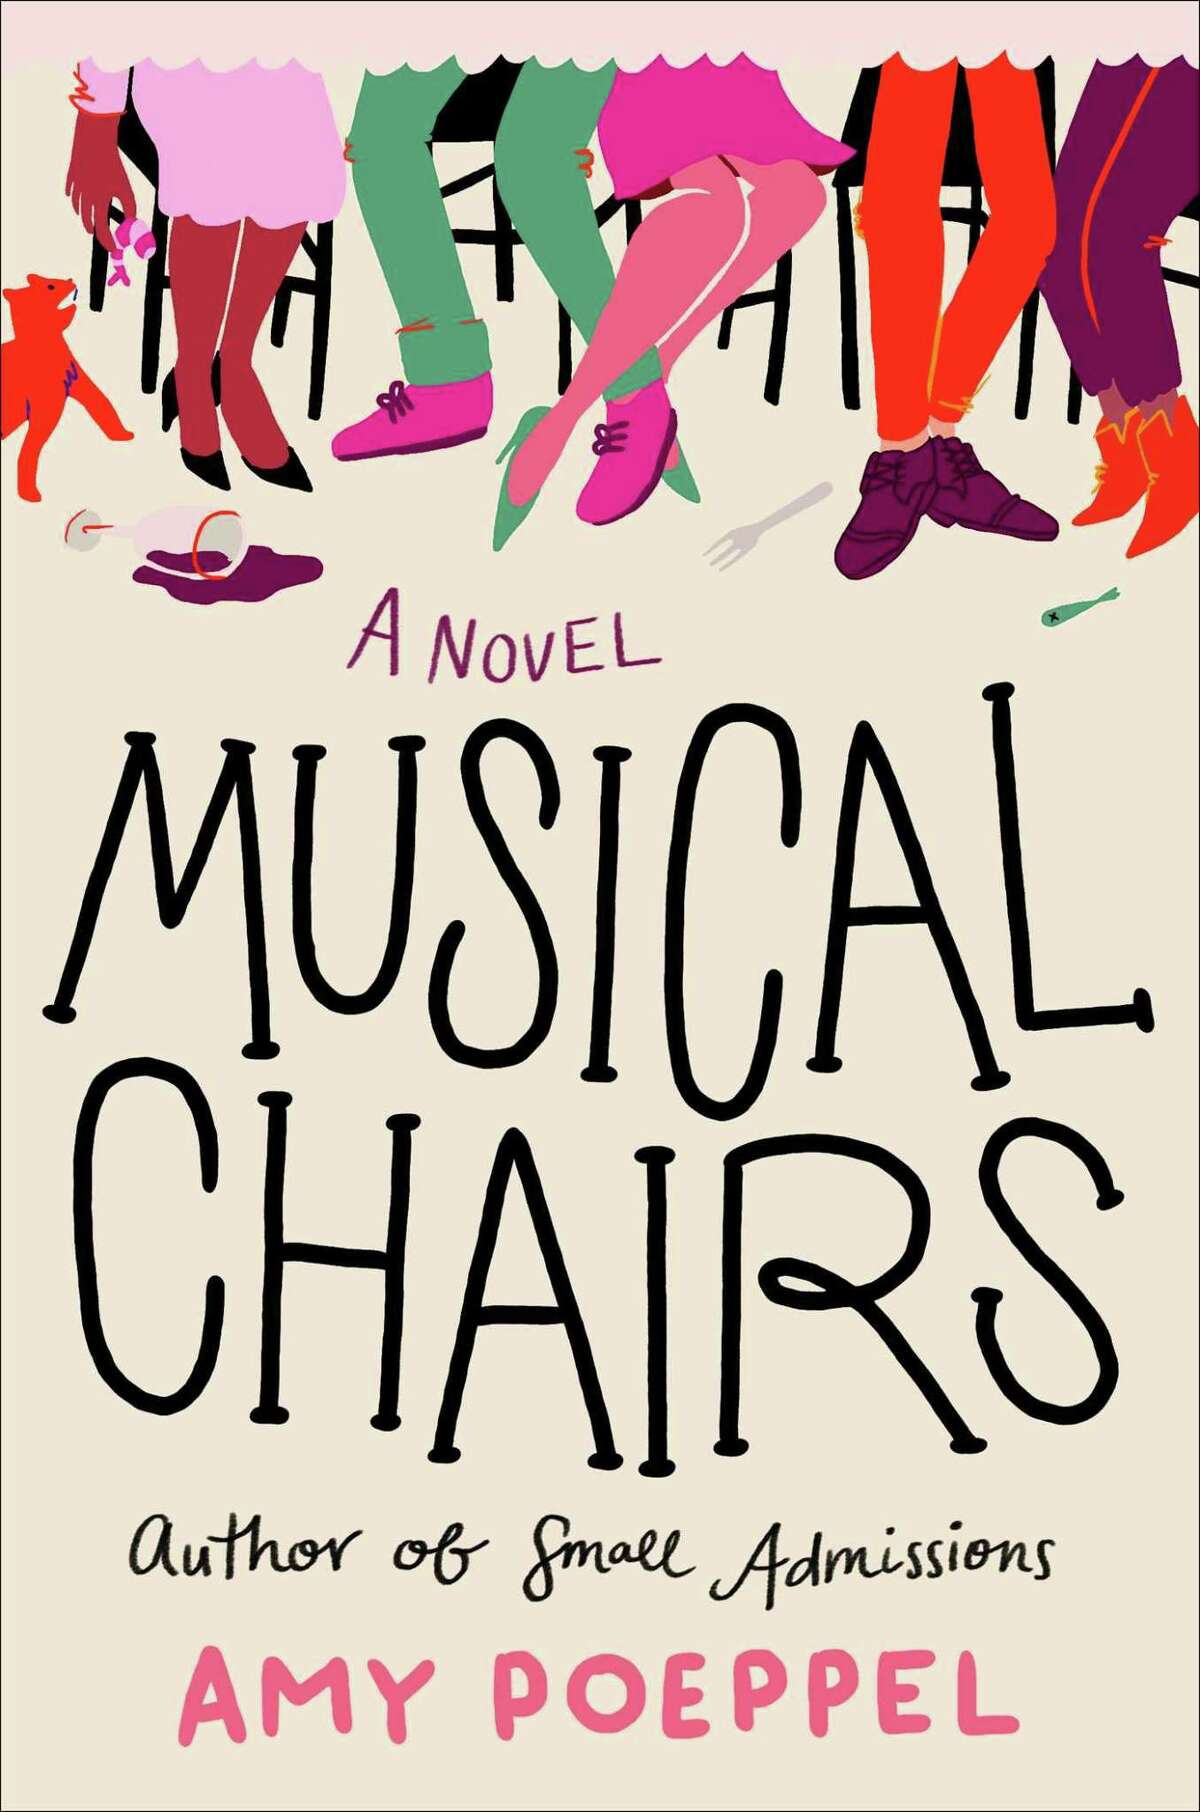 Amy Poeppel's novel “Musical Chairs” was published on July 21.